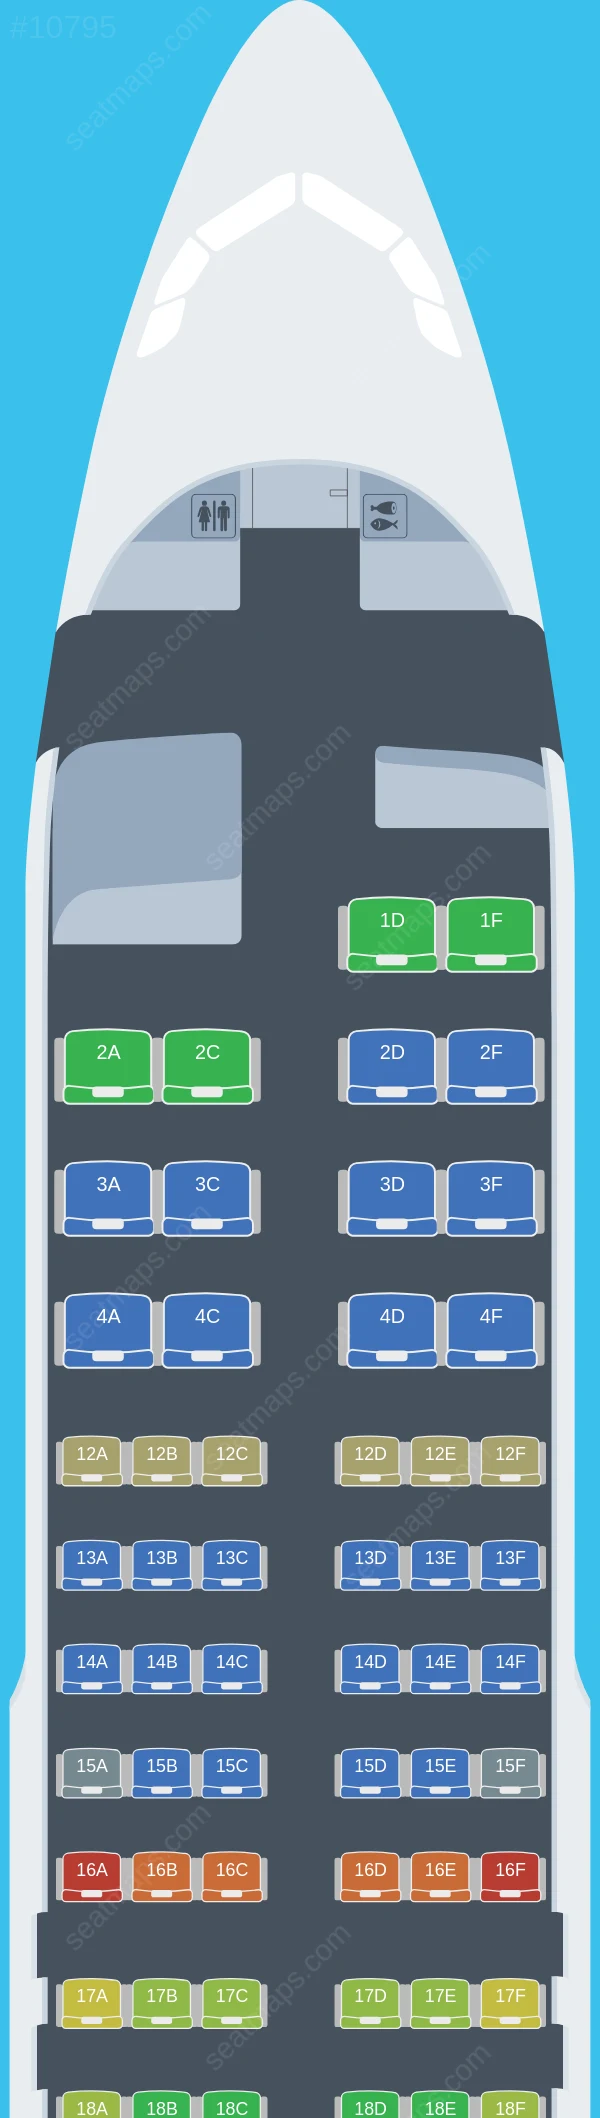 Freedom Airline Express Airbus A320-200 seatmap preview